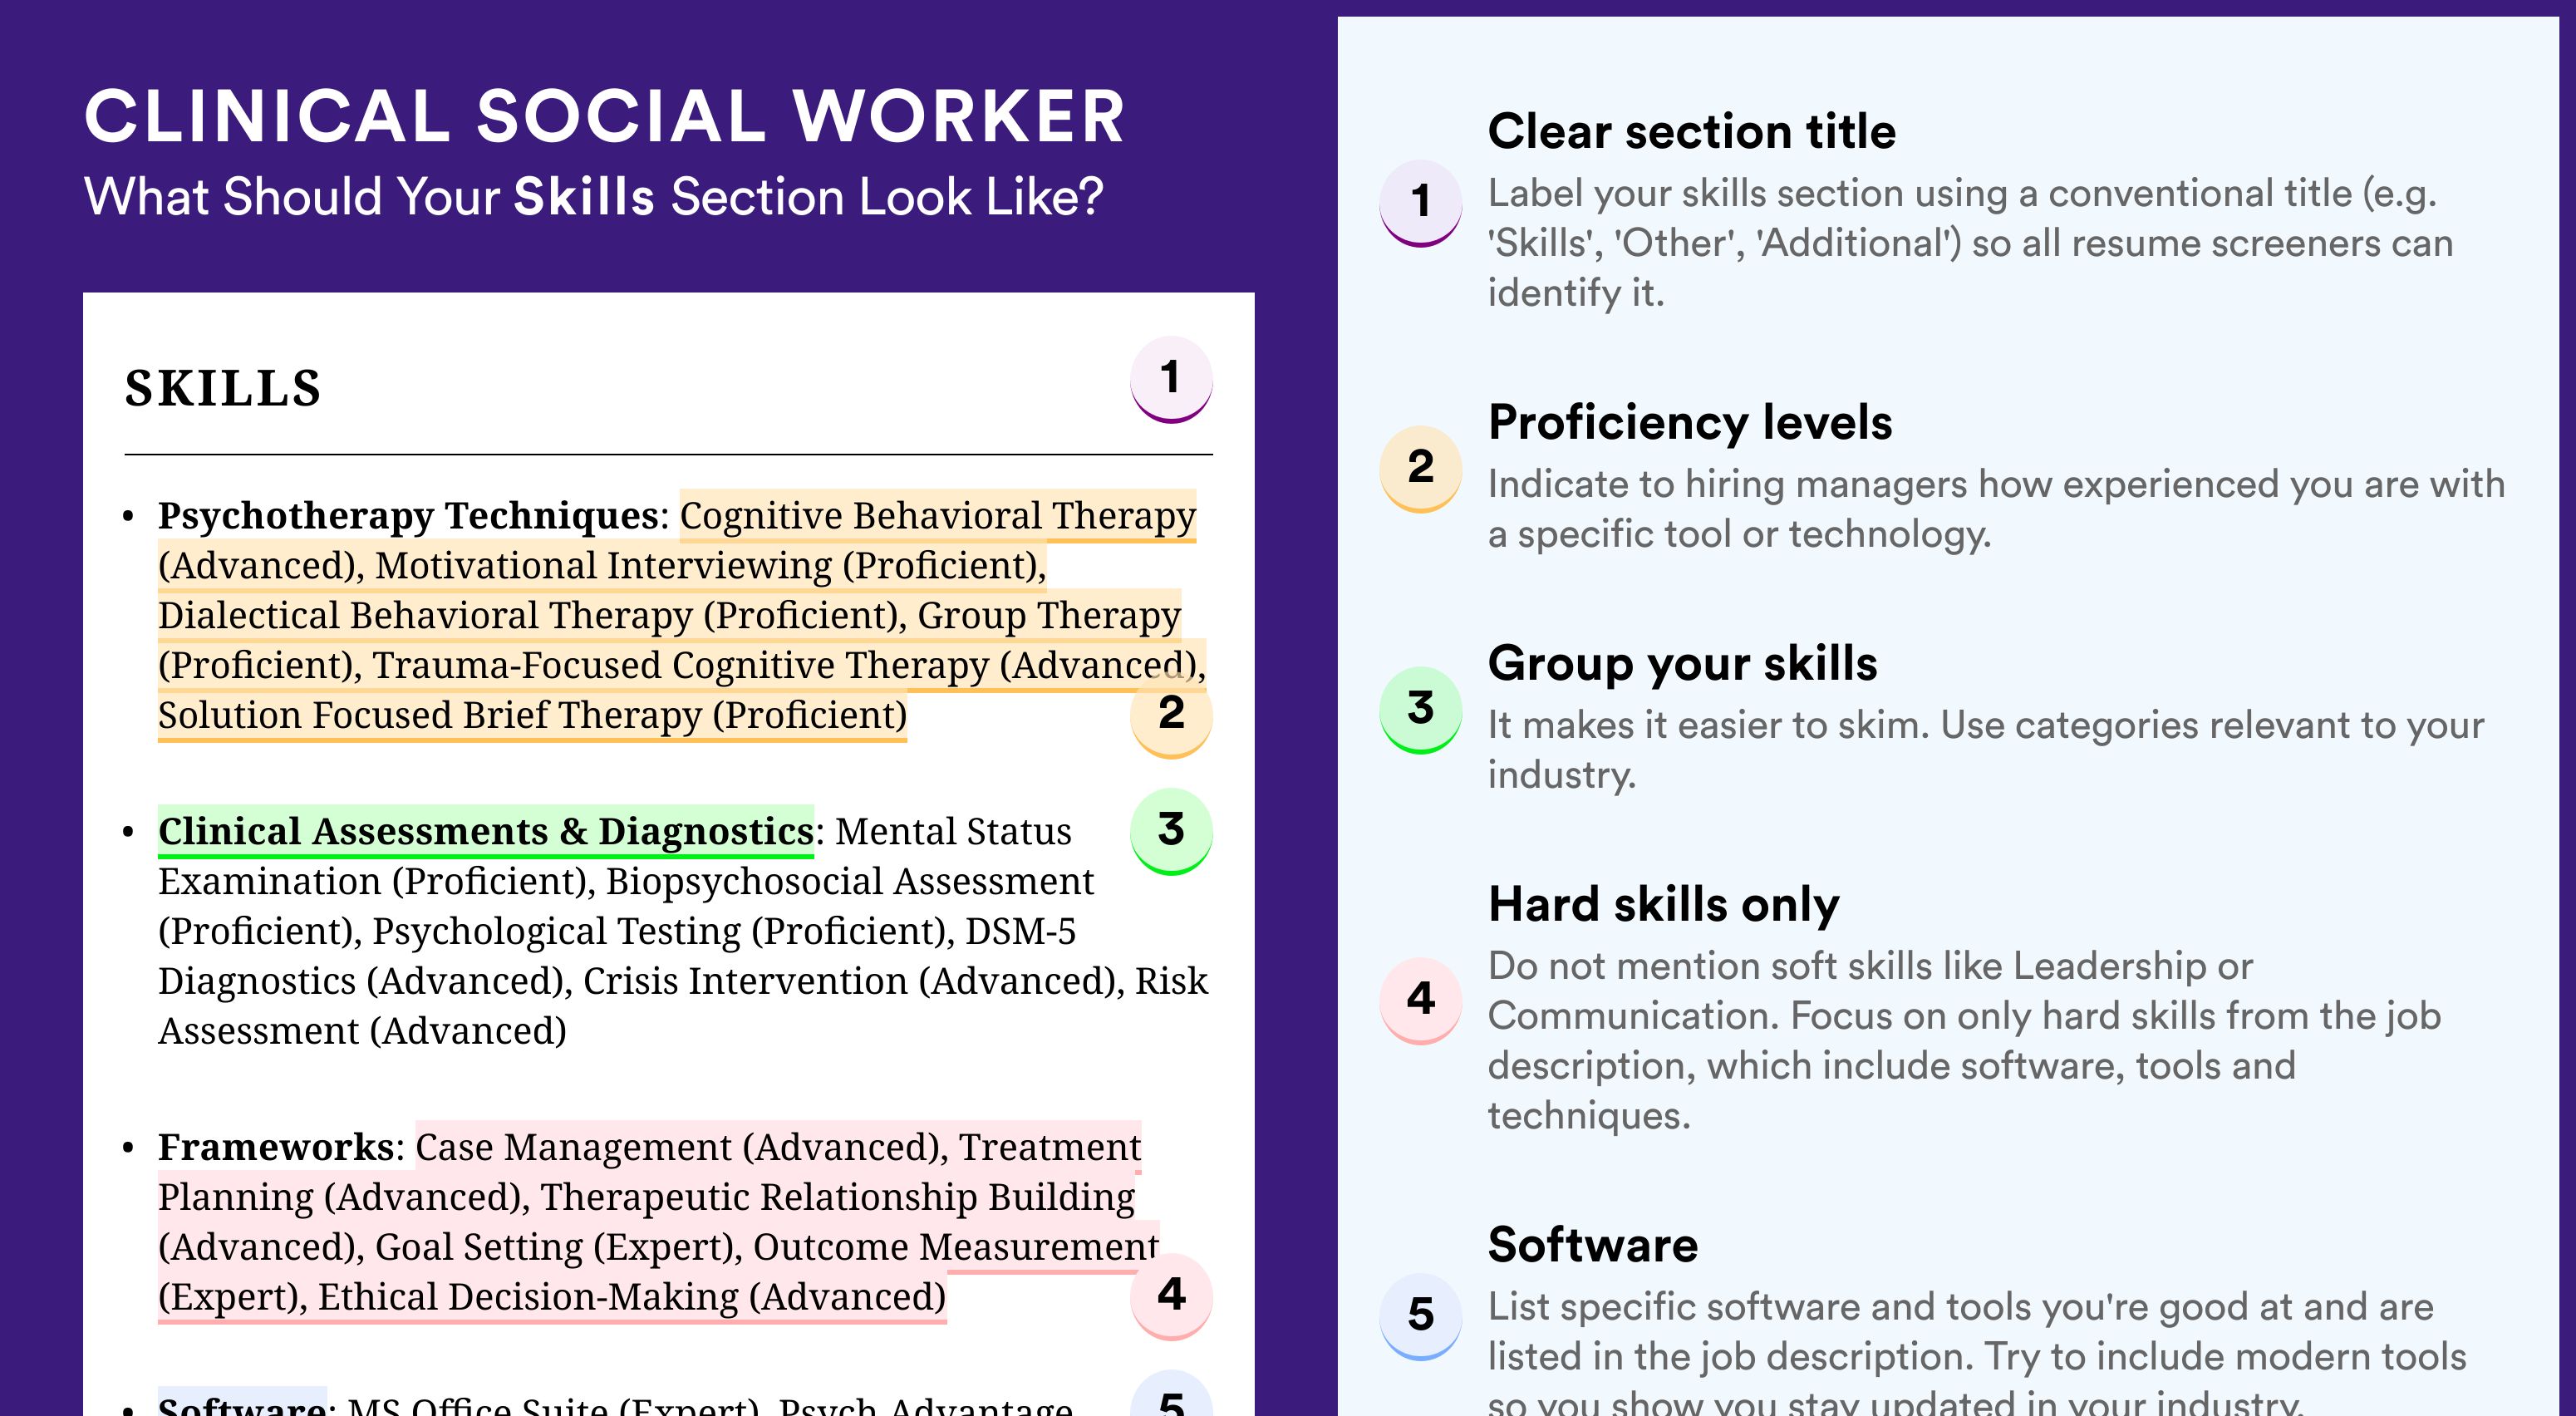 How To Write Your Skills Section - Clinical Social Worker Roles